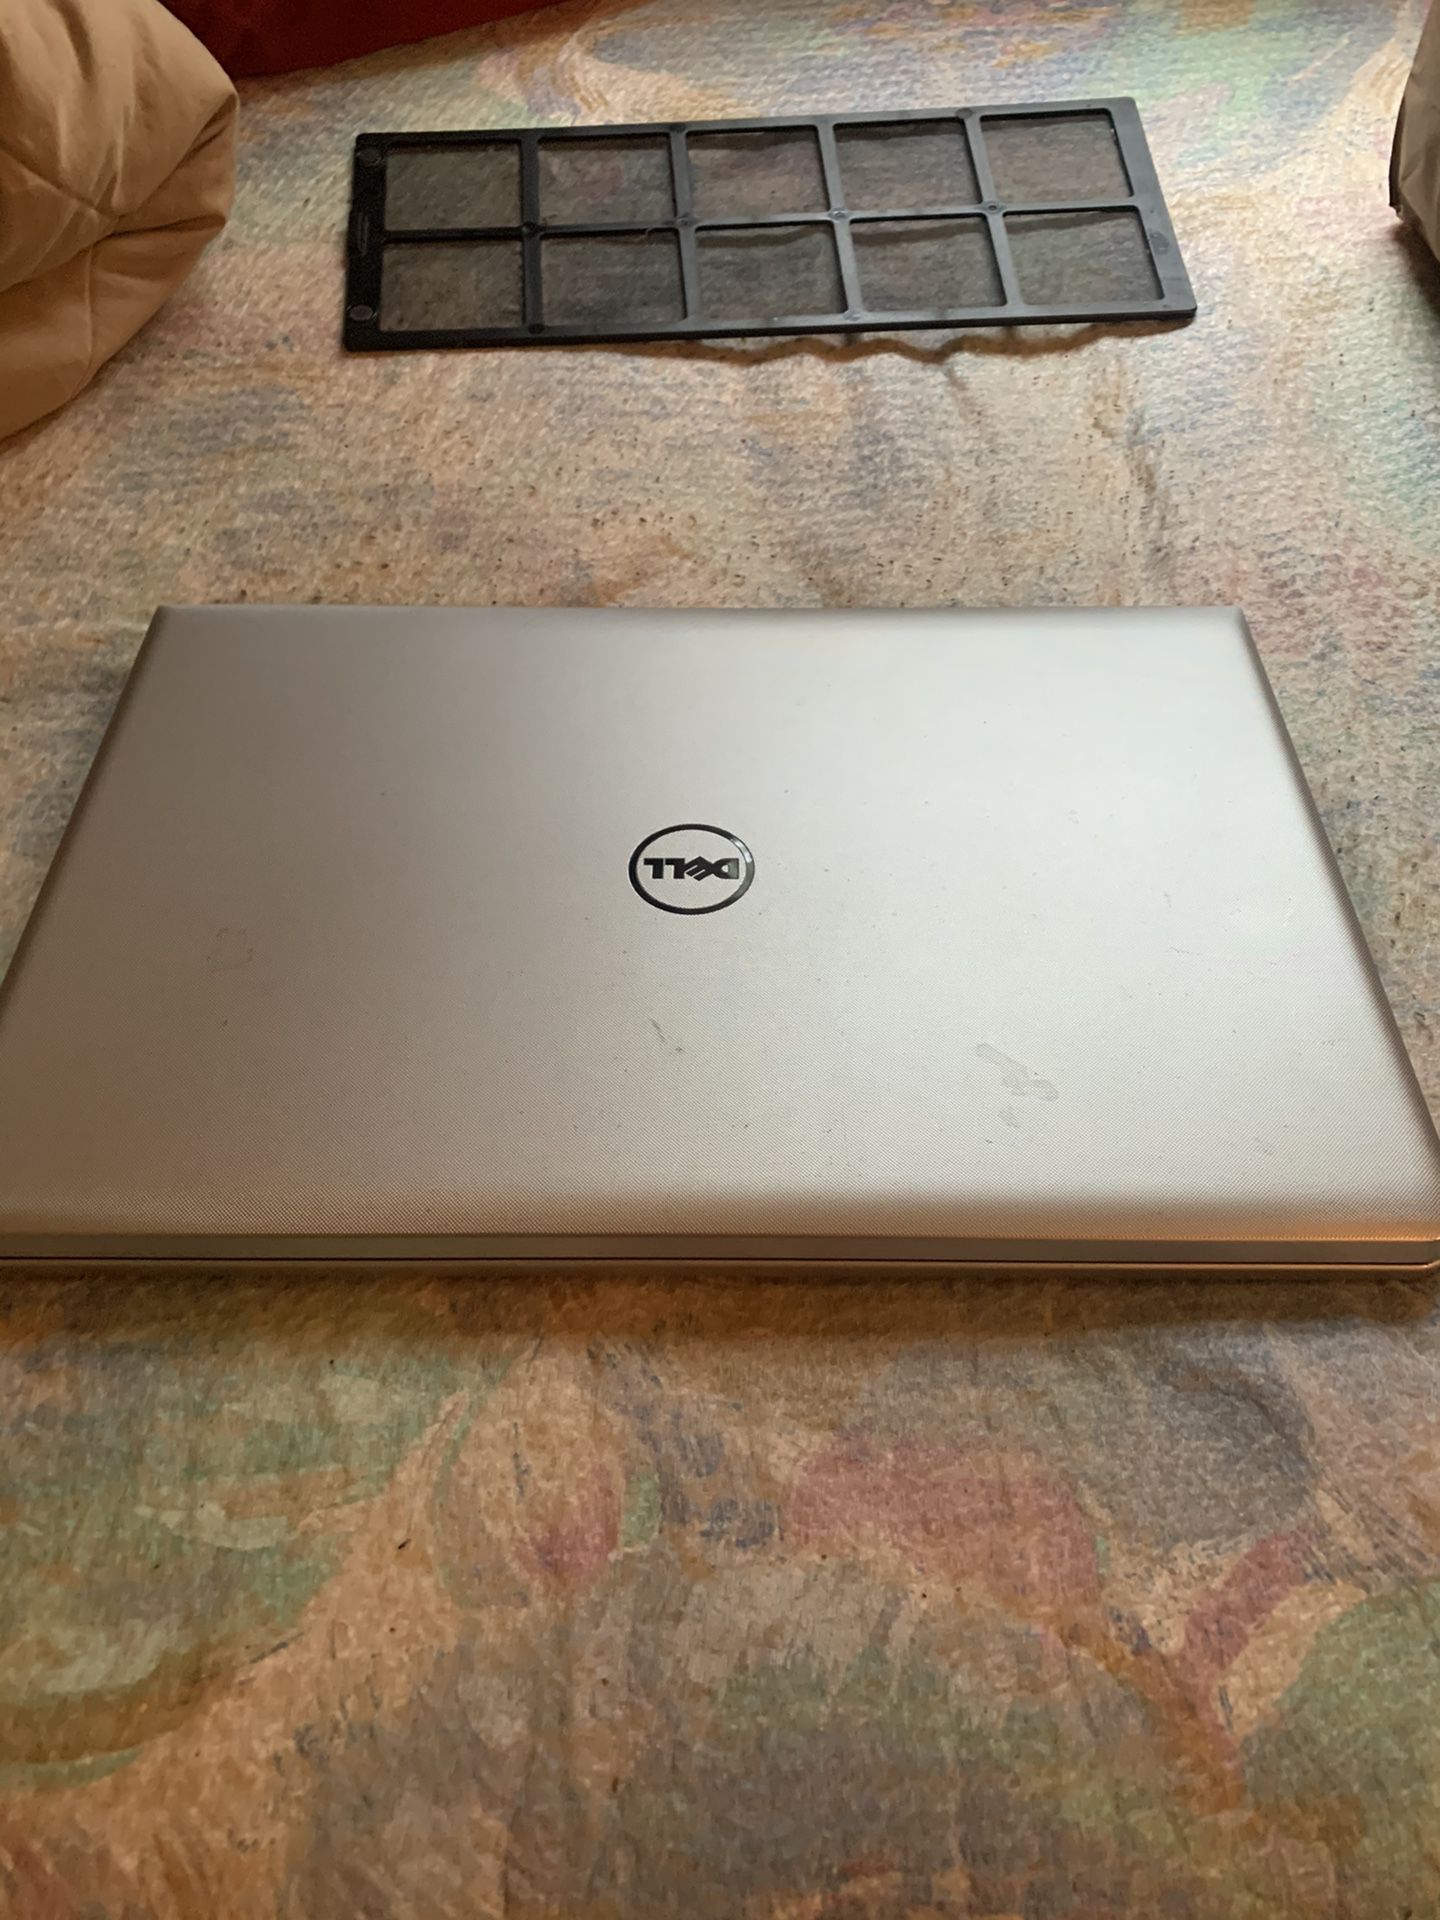 Dell Laptop i7 Processor with Gaming GPU